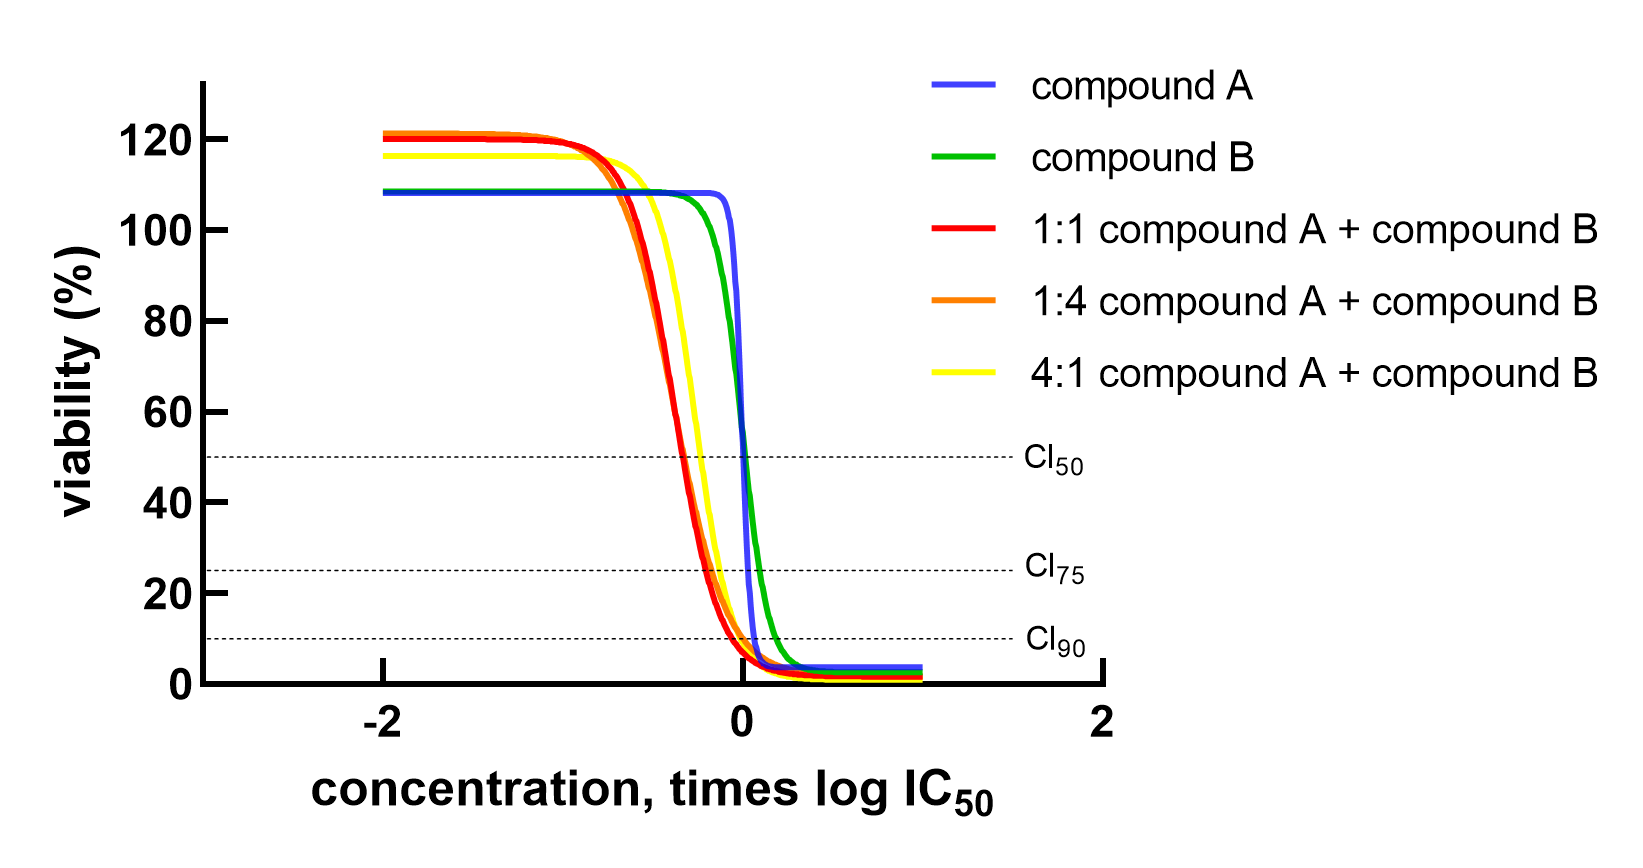 Dose response curves of single agents (green, blue) and fixed ratio mixtures (orange, yellow, red) allow for curve-shift analysis. Combination index is calculated at three different effect levels.